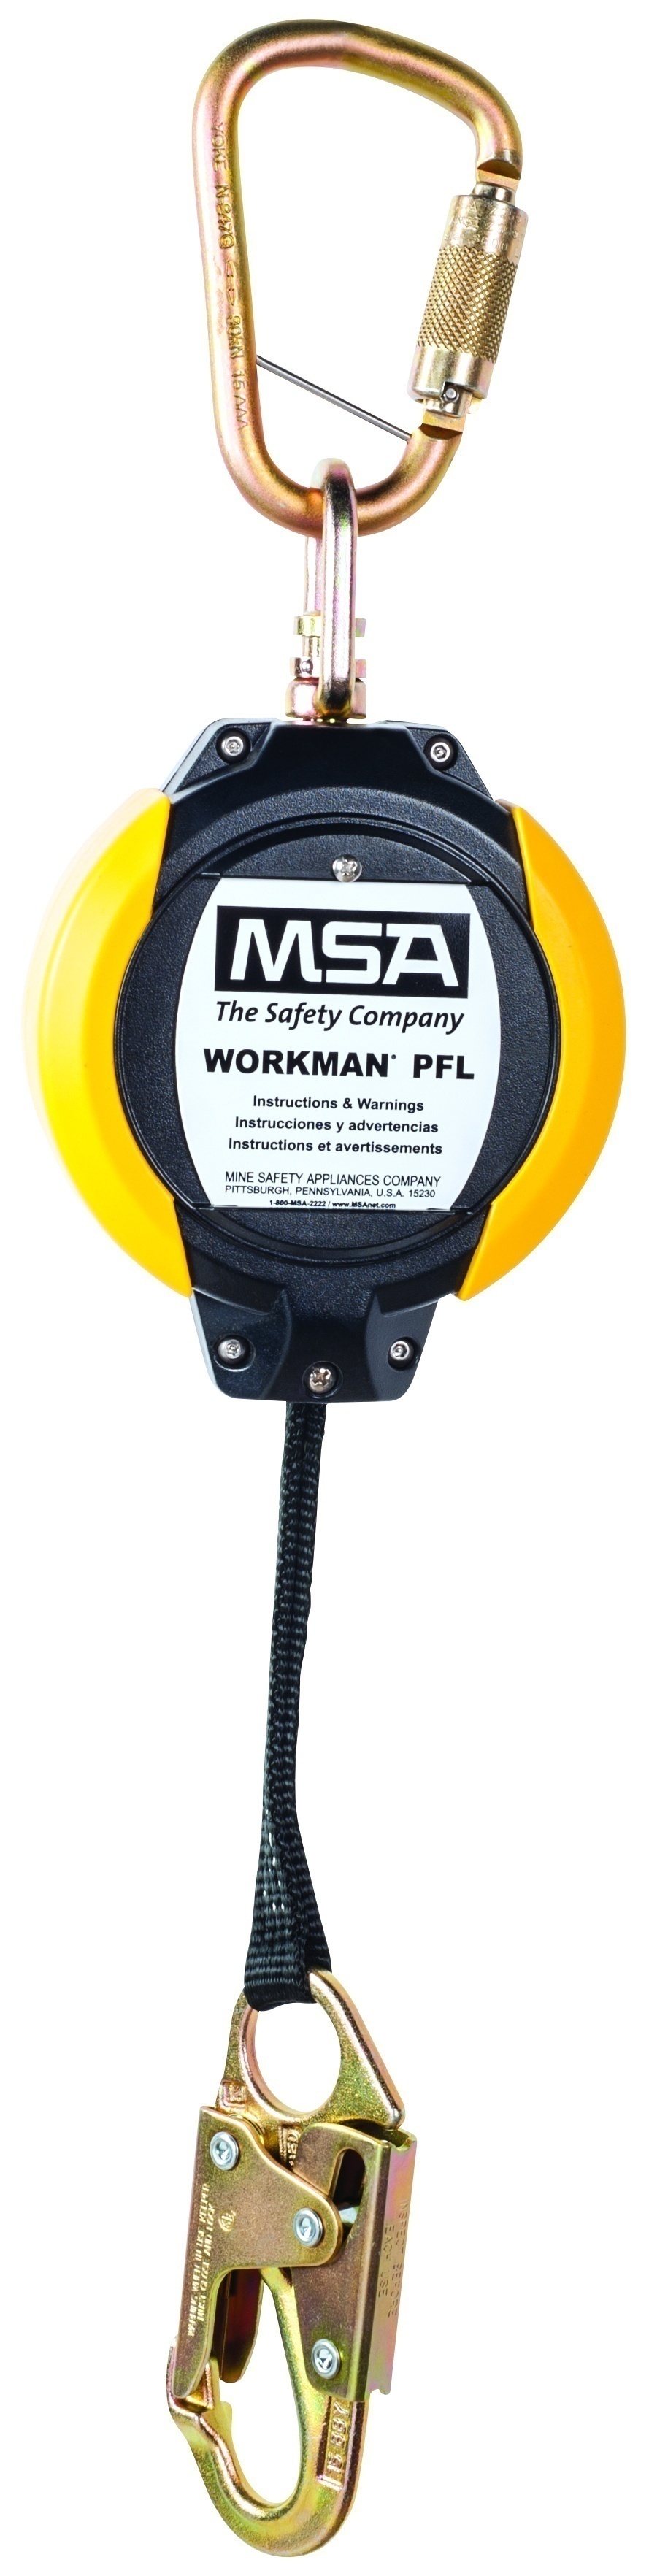 MSA Workman 12 FT Web Personal Fall Limiter from Columbia Safety